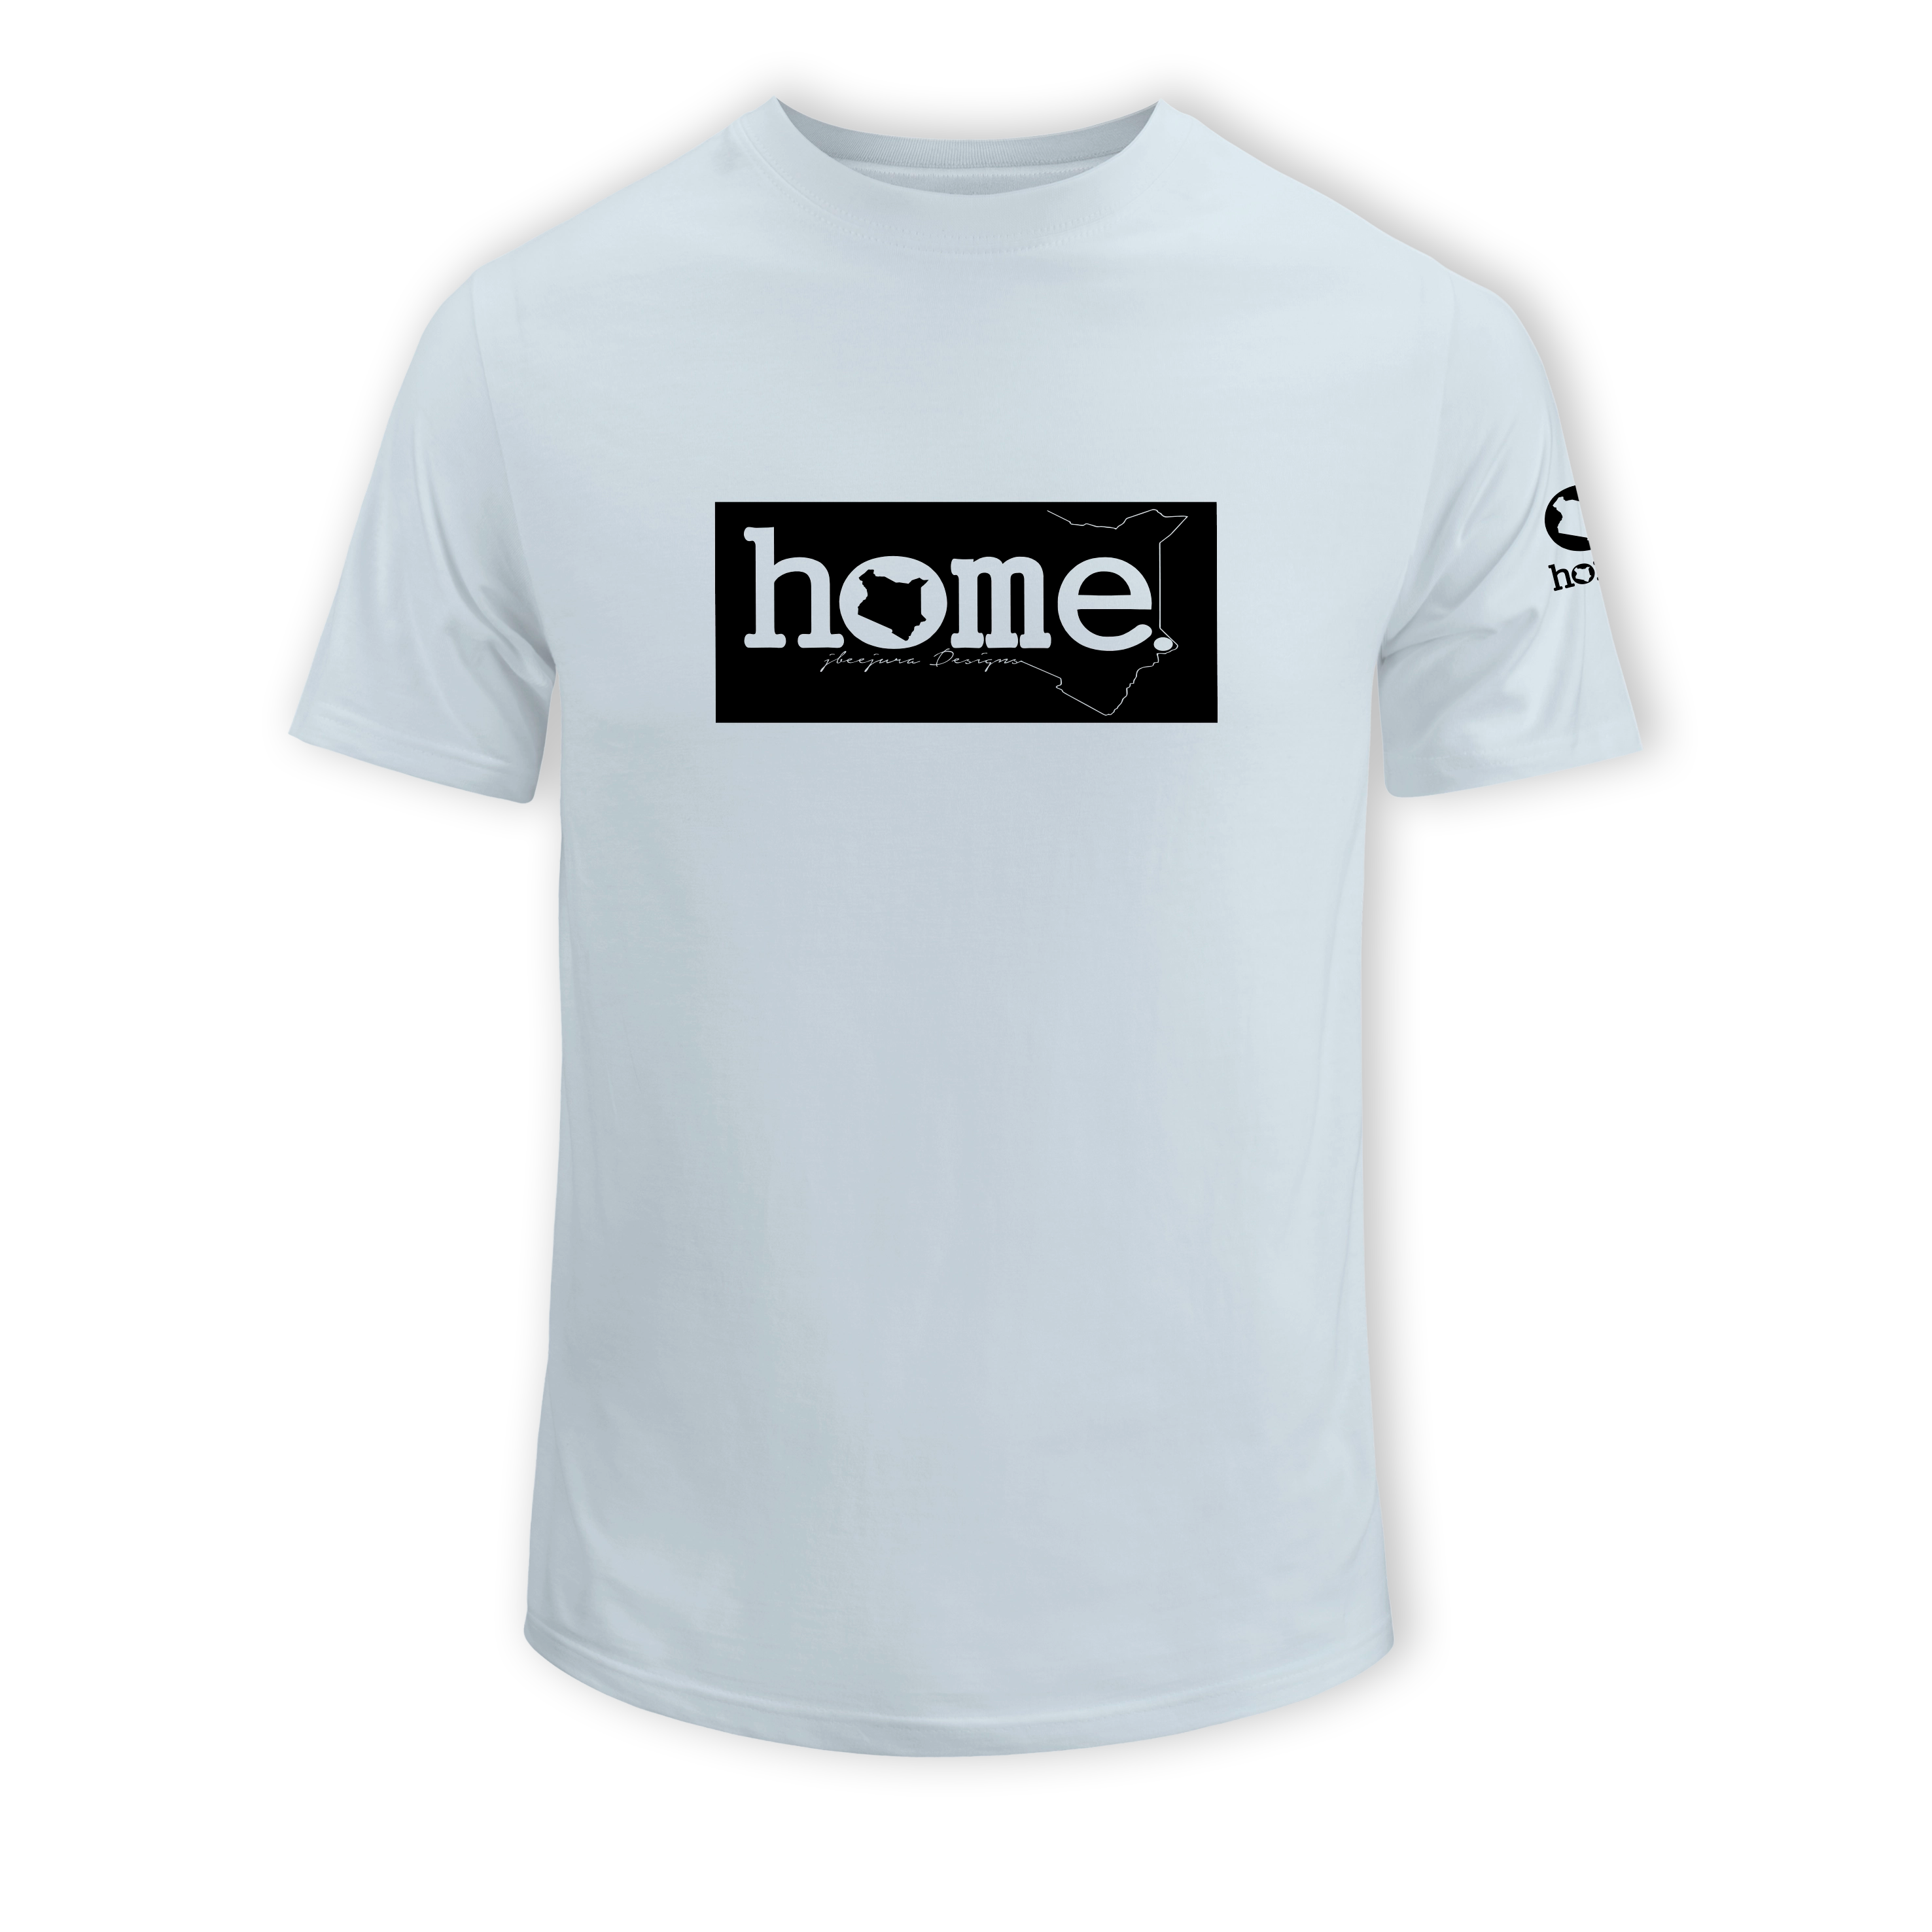 home_254 KIDS SHORT-SLEEVED SKY BLUE T-SHIRT WITH A BLACK CLASSIC PRINT – COTTON PLUS FABRIC